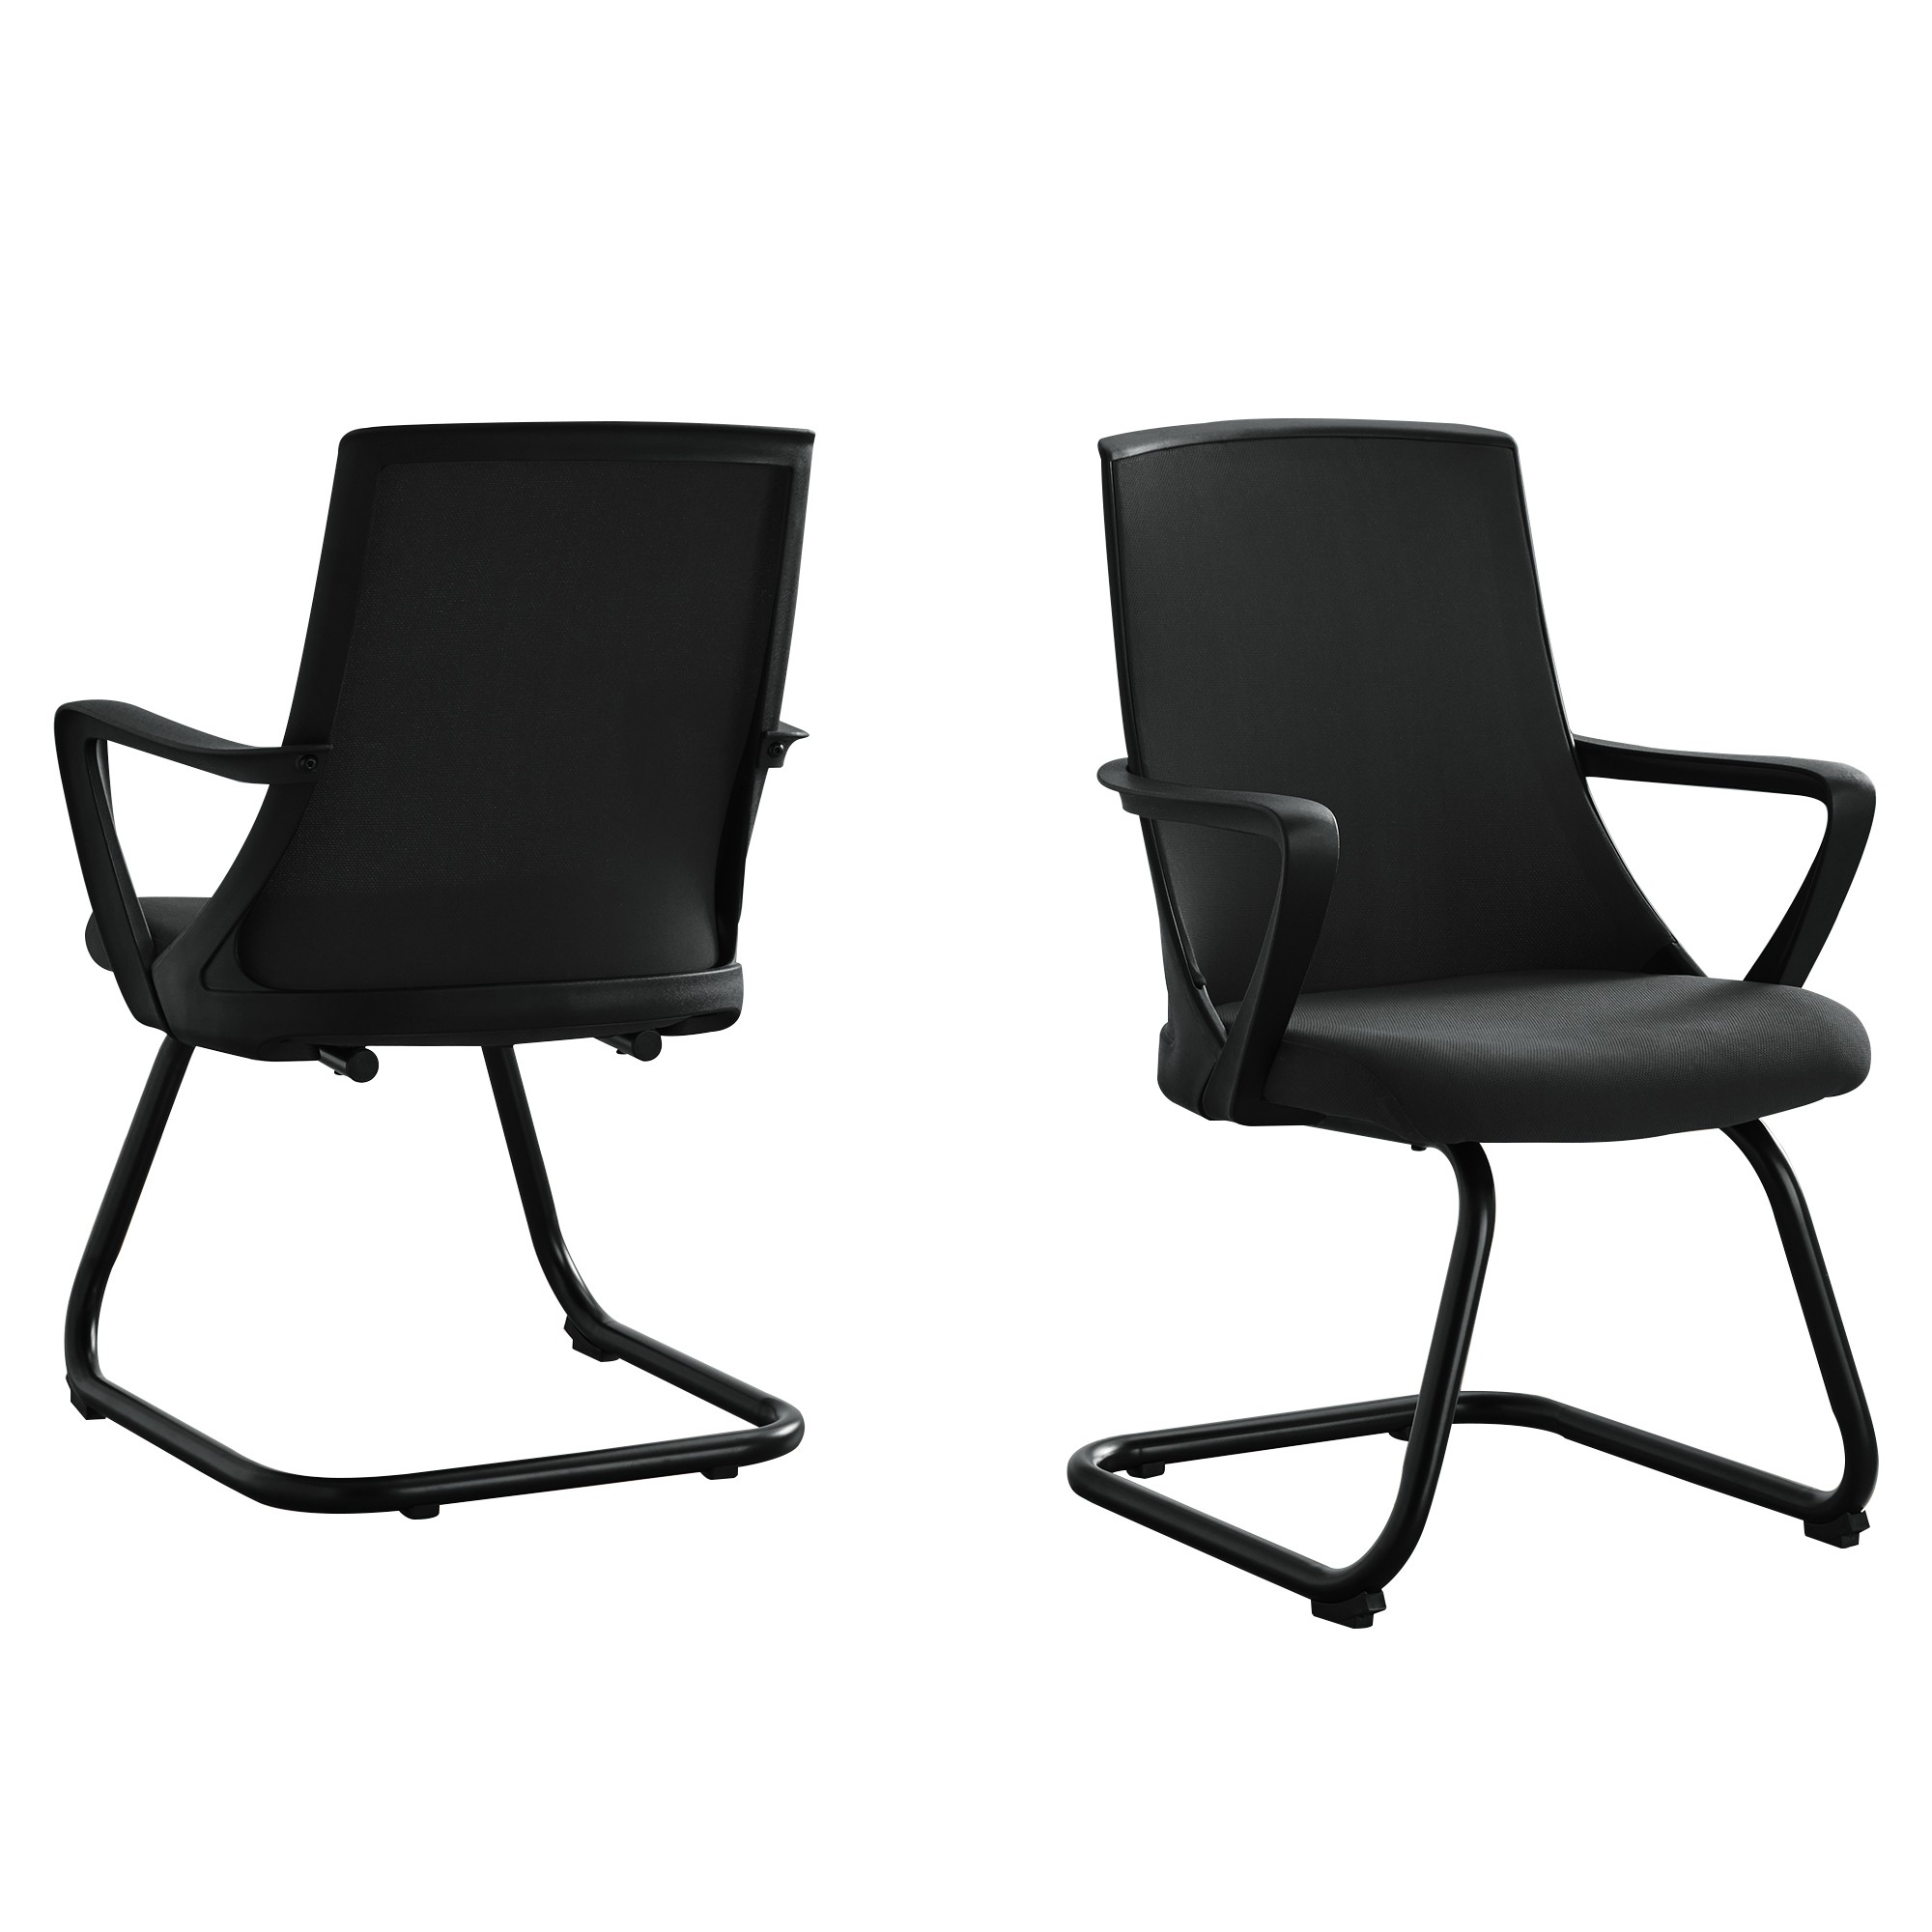 21" X 21" X 35" Black Mesh and Mid Back Office Chair - Set of 2